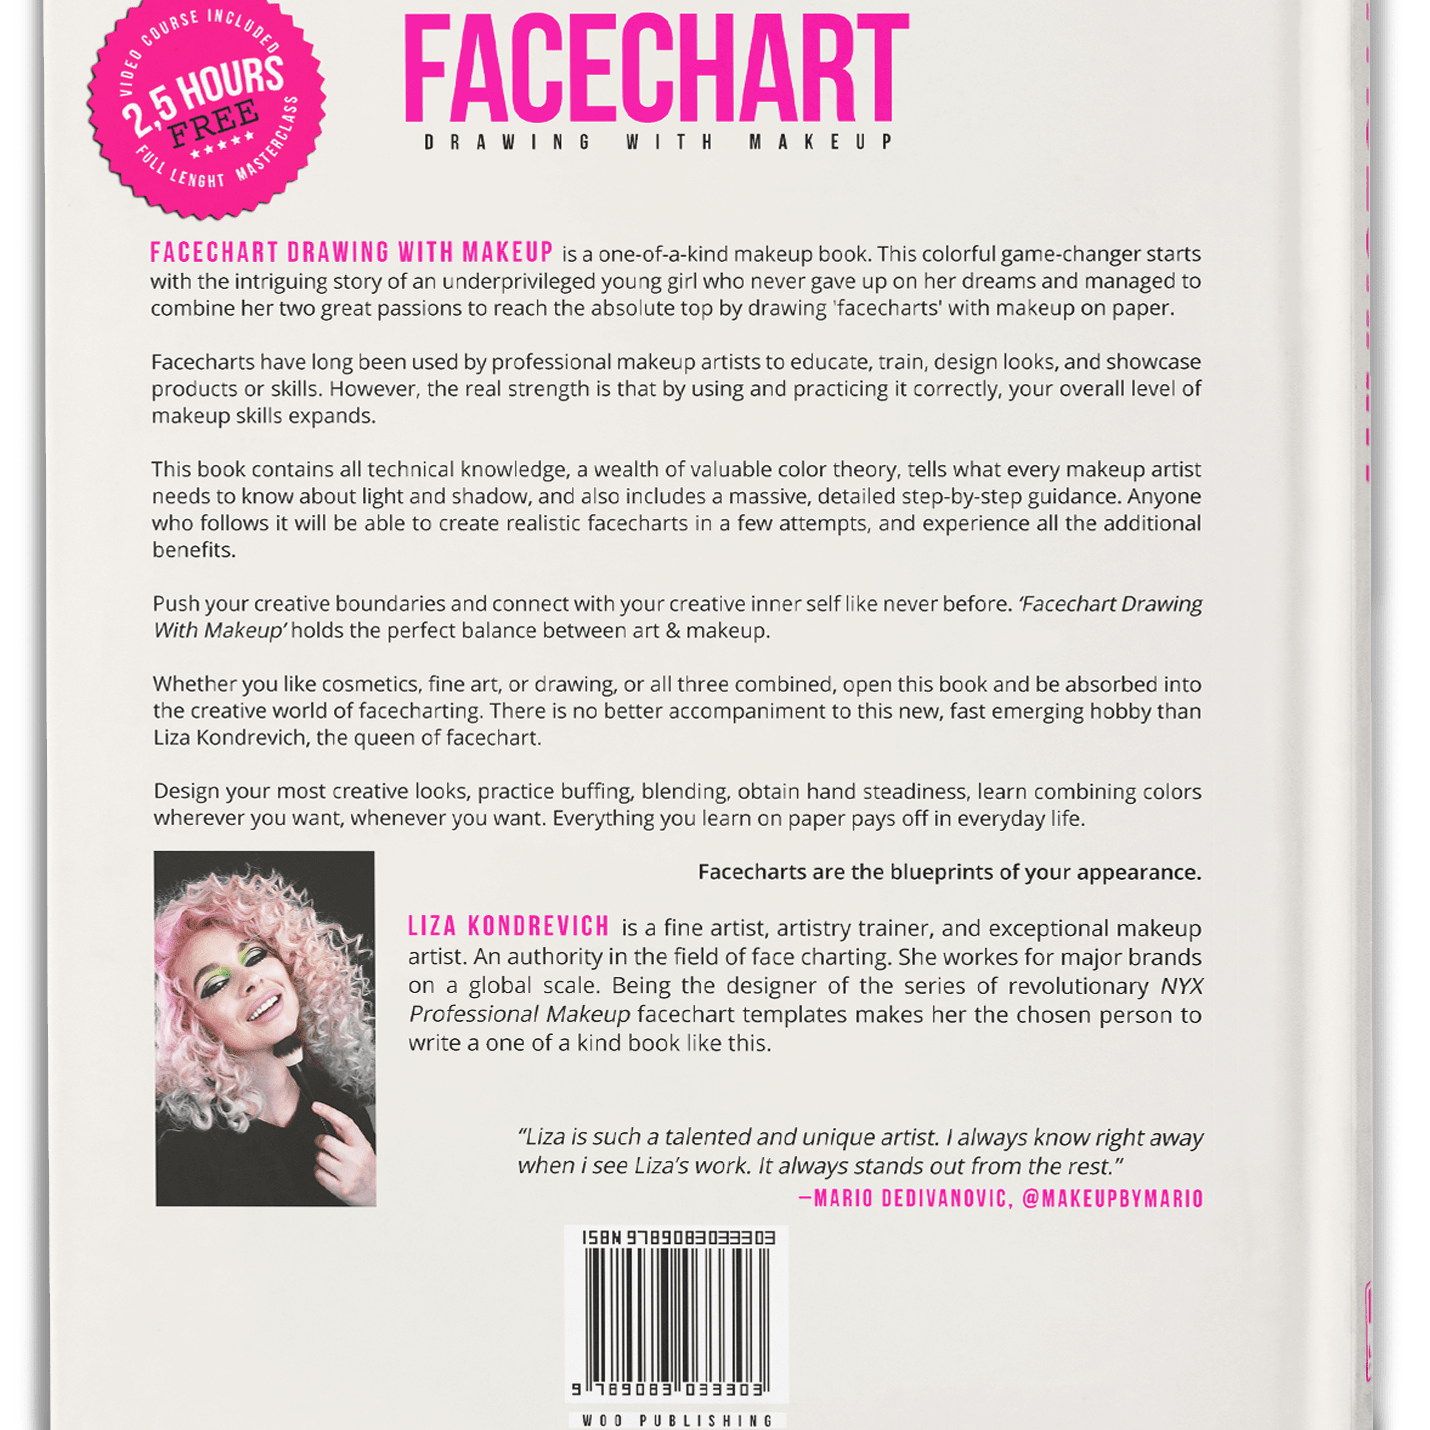 back cover of The Book about face chart makeup. The backside of the facechart book by liza kondrevich